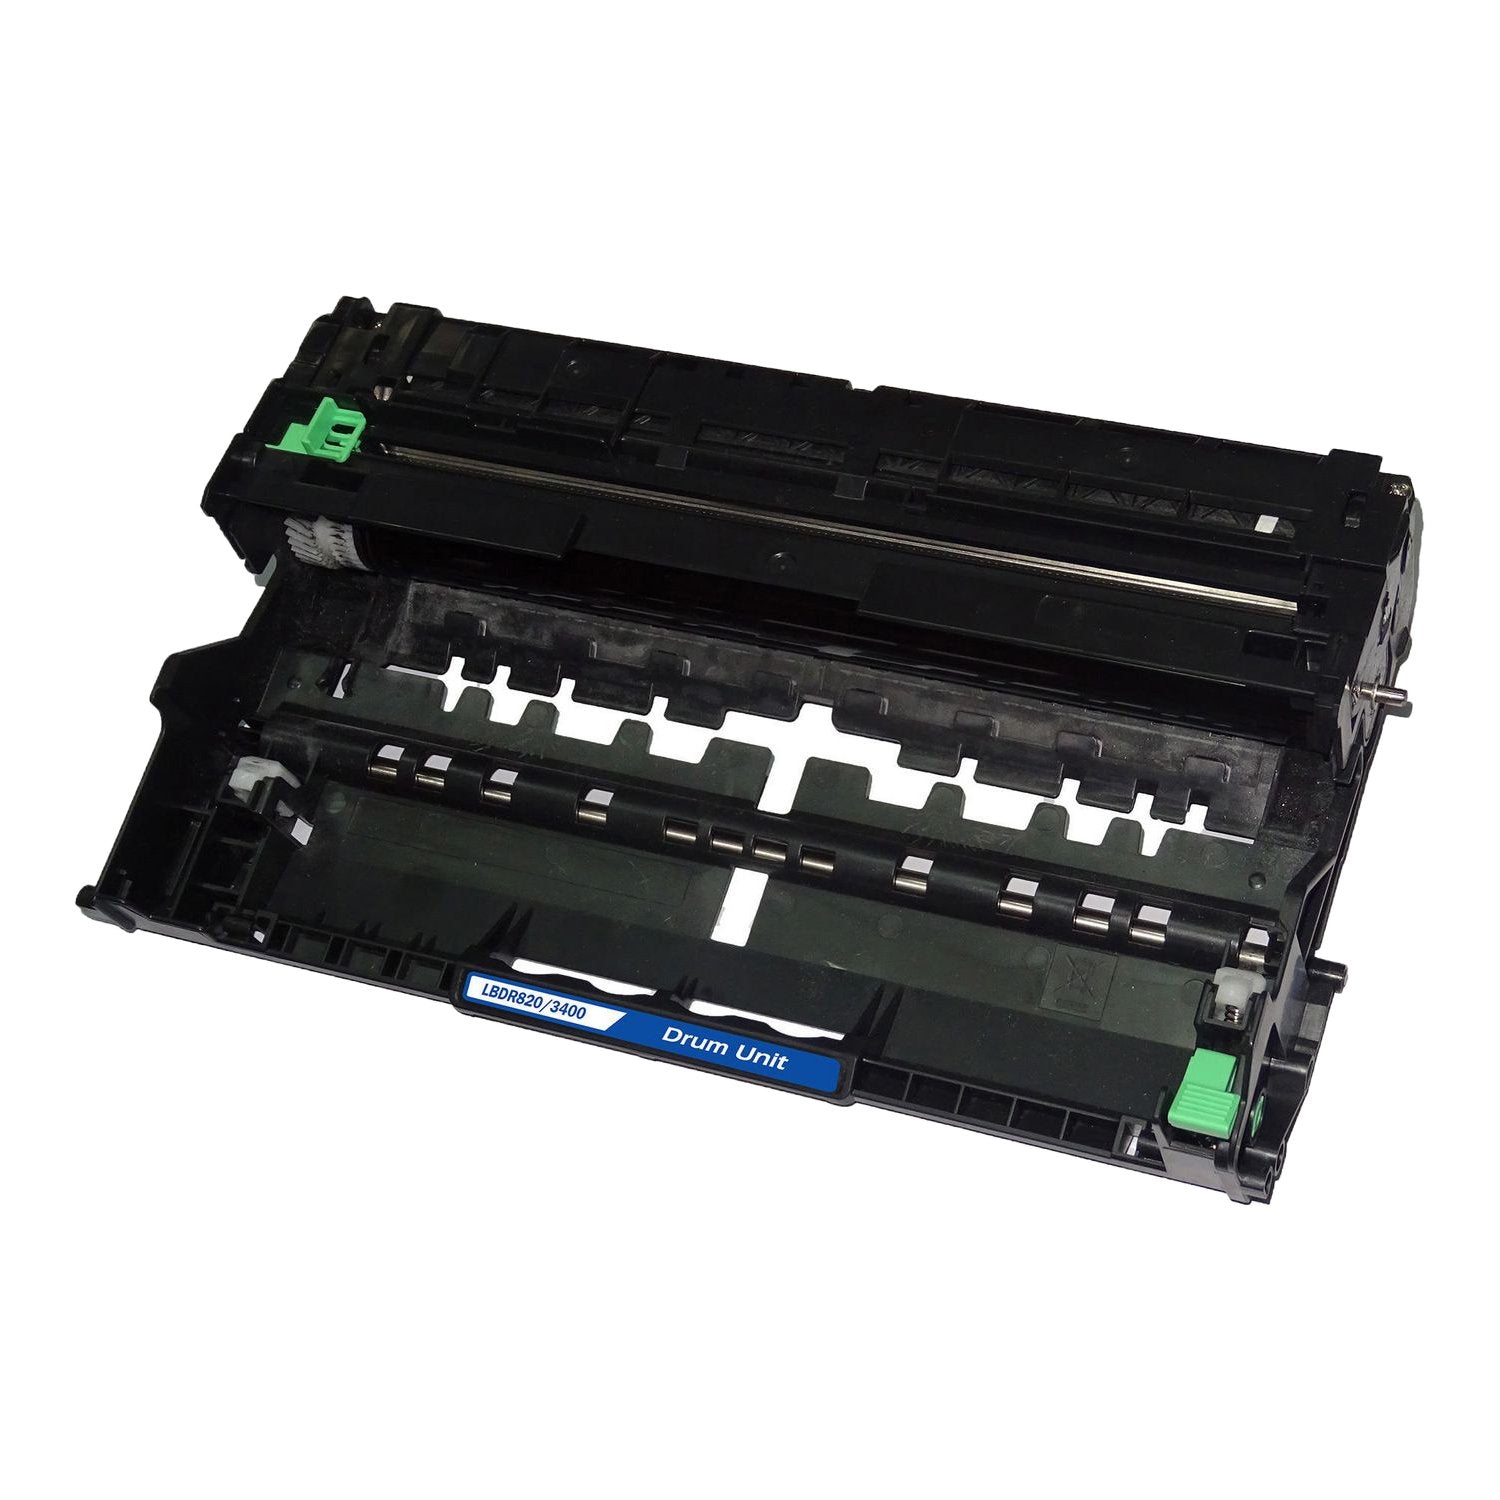 Absolute Toner Compatible Brother DR820 Black Drum Unit Toner Cartridge | Absolute Toner Brother Toner Cartridges